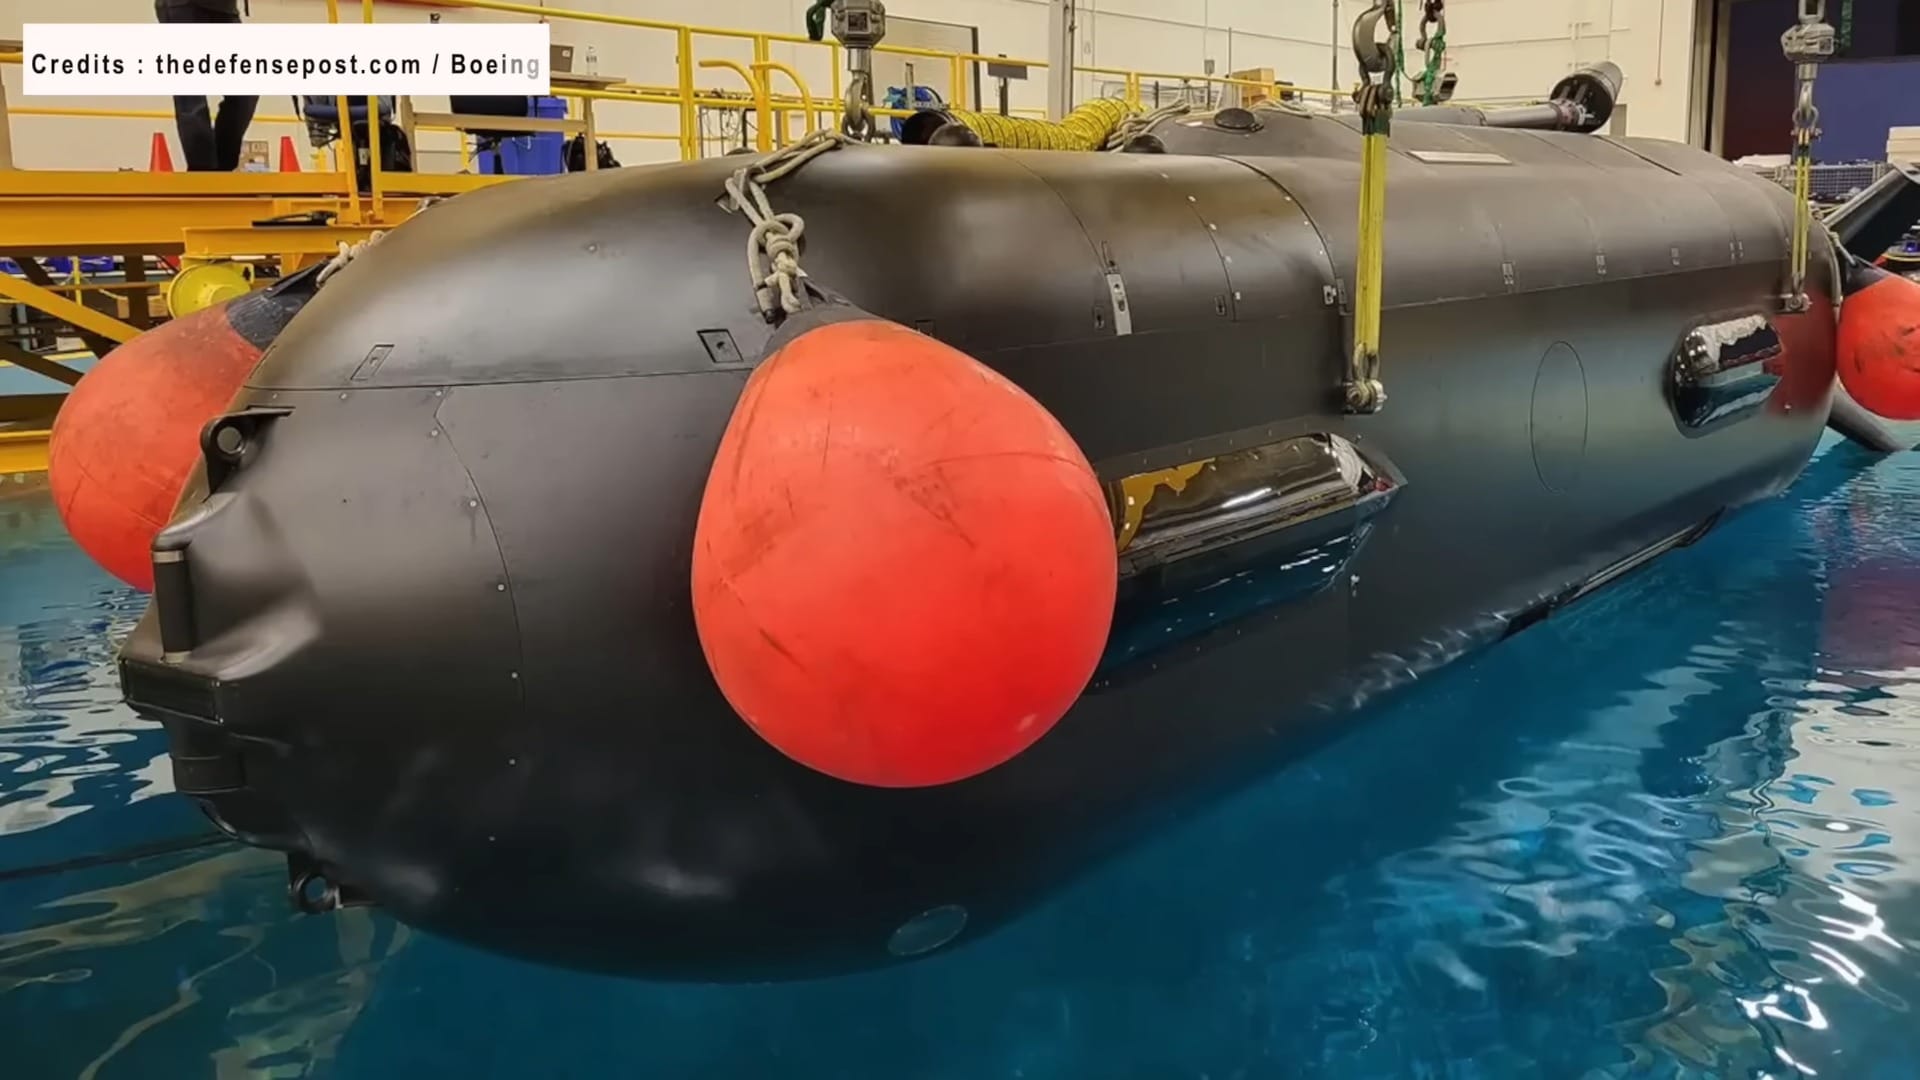 Boeing delivers a submarine drone: ORCA